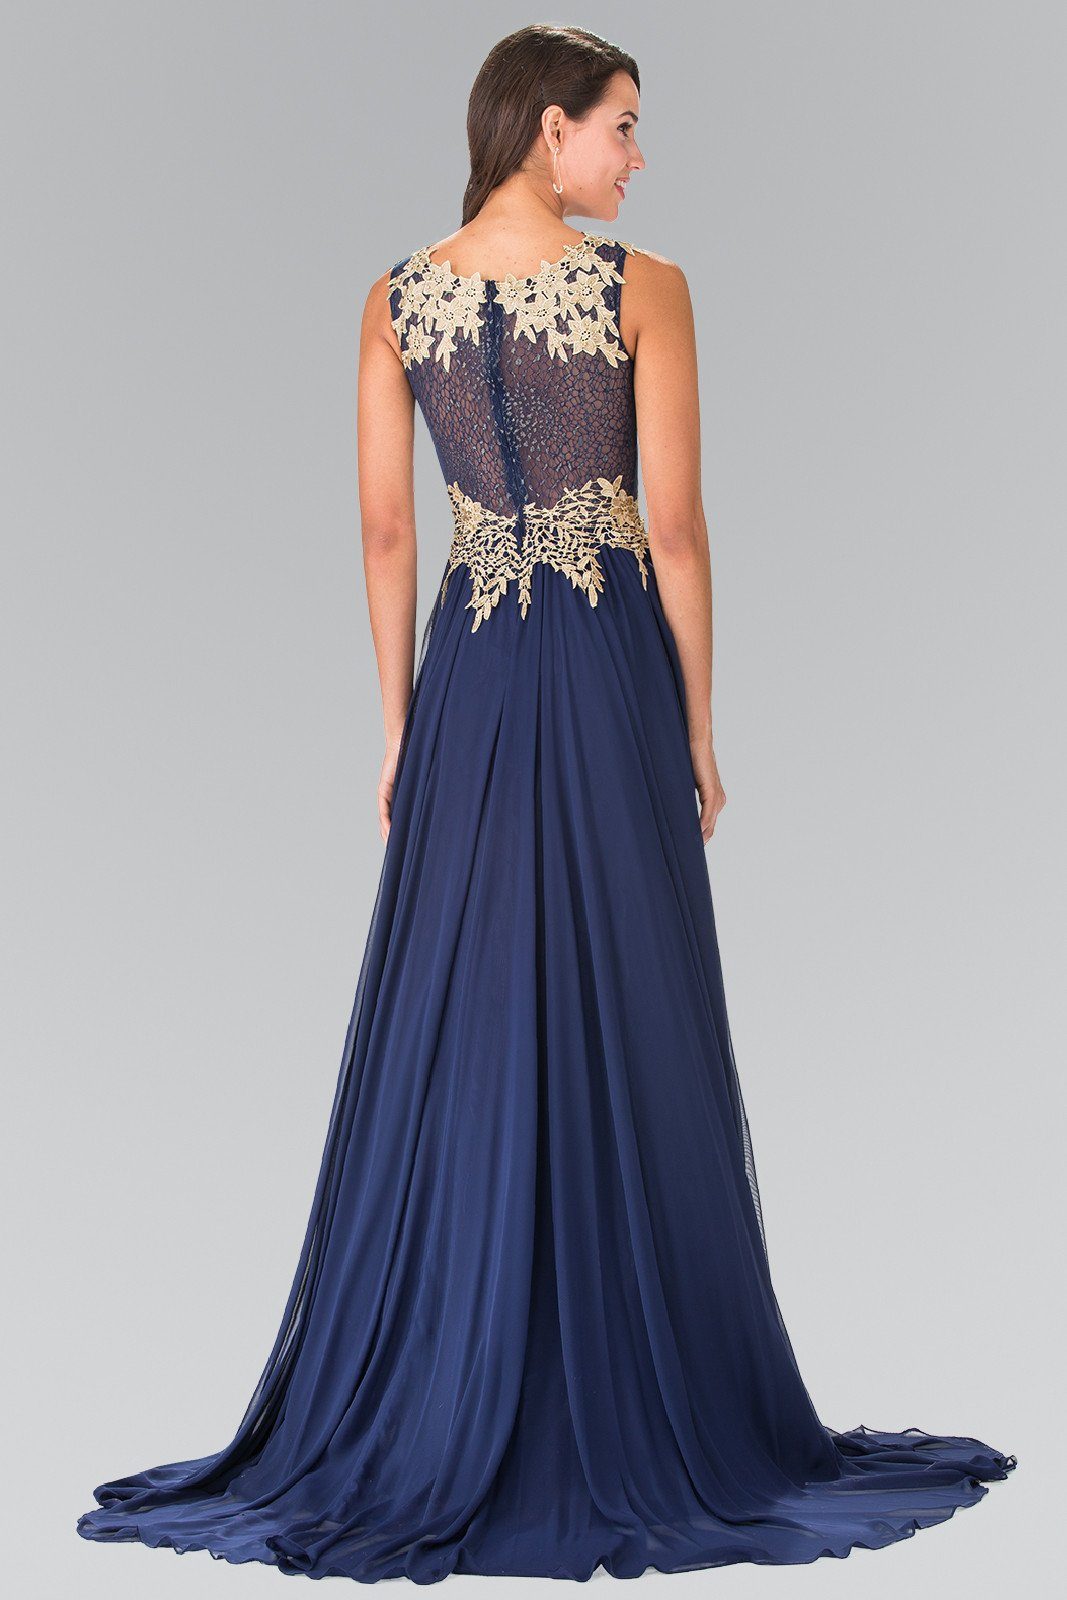 Long Sleeveless Dress with Floral Lace Top by Elizabeth K GL2288-Long Formal Dresses-ABC Fashion